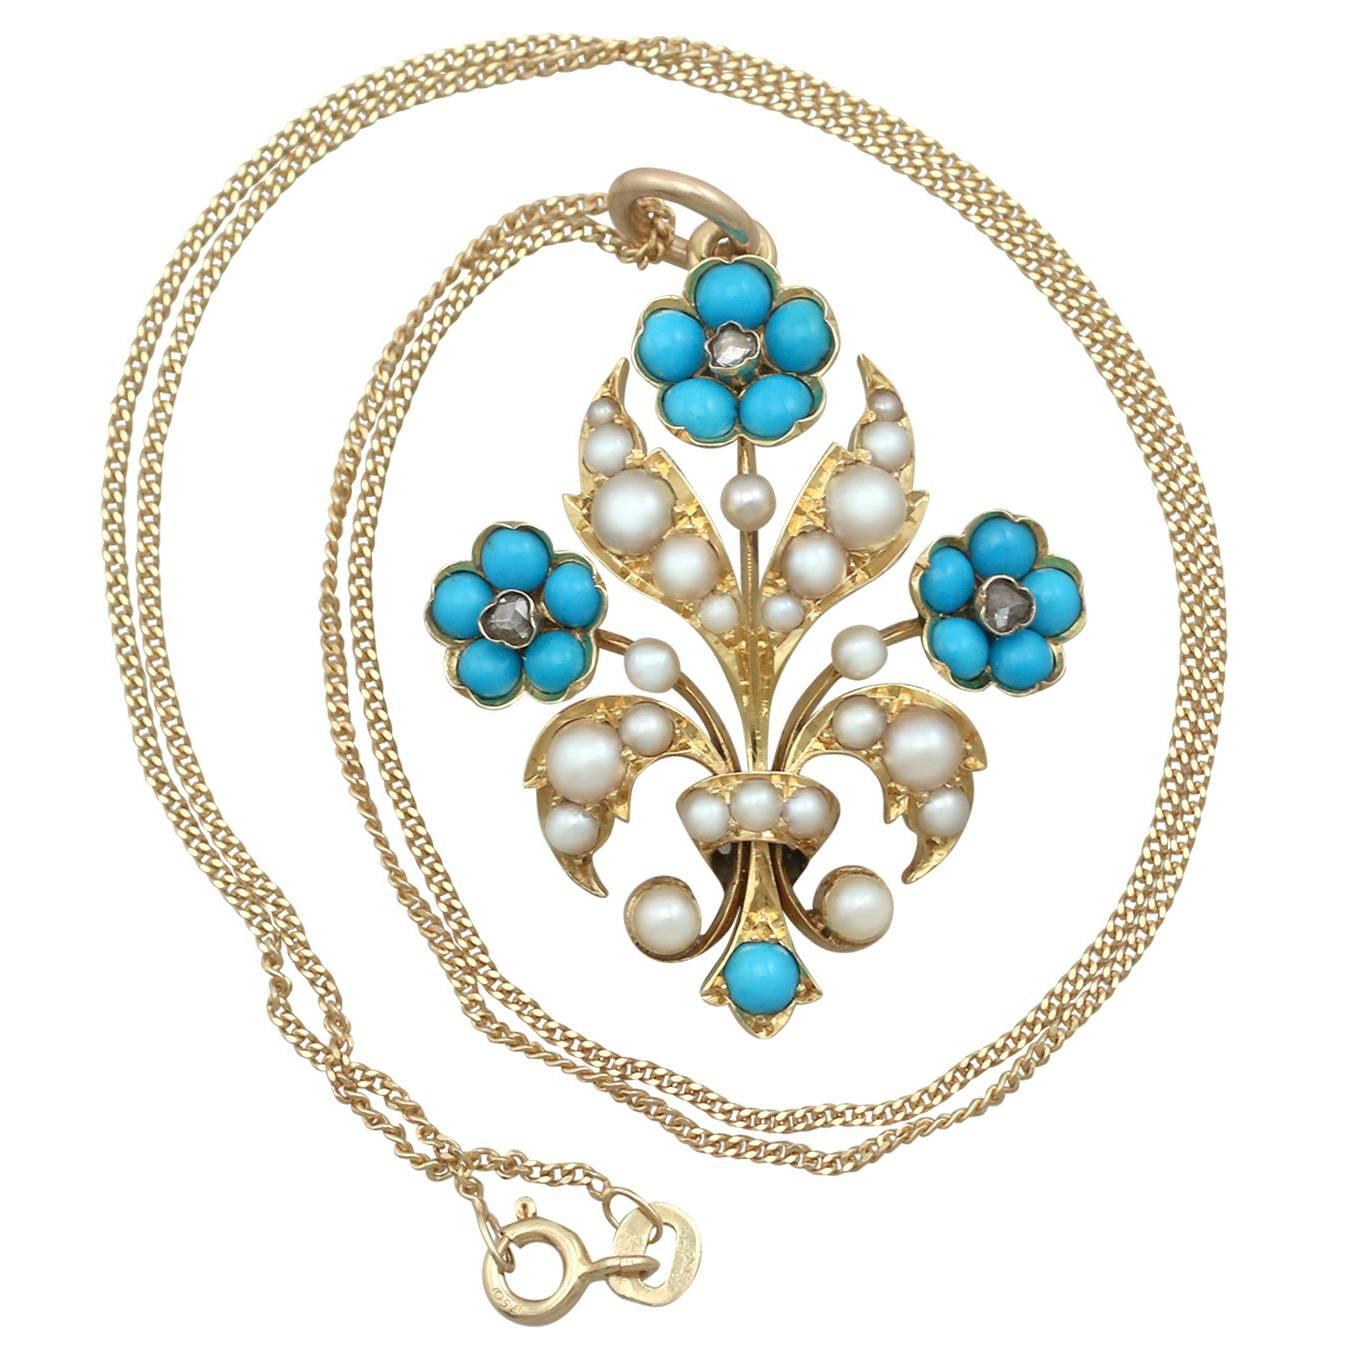 An exceptional Victorian turquoise and seed pearl, 0.12 Carat diamond and 15 karat yellow gold 'fleur-de-lis' pendant; part of our diverse antique jewelry collections.

This exceptional, fine and impressive antique fleur-de-lis pendant has been